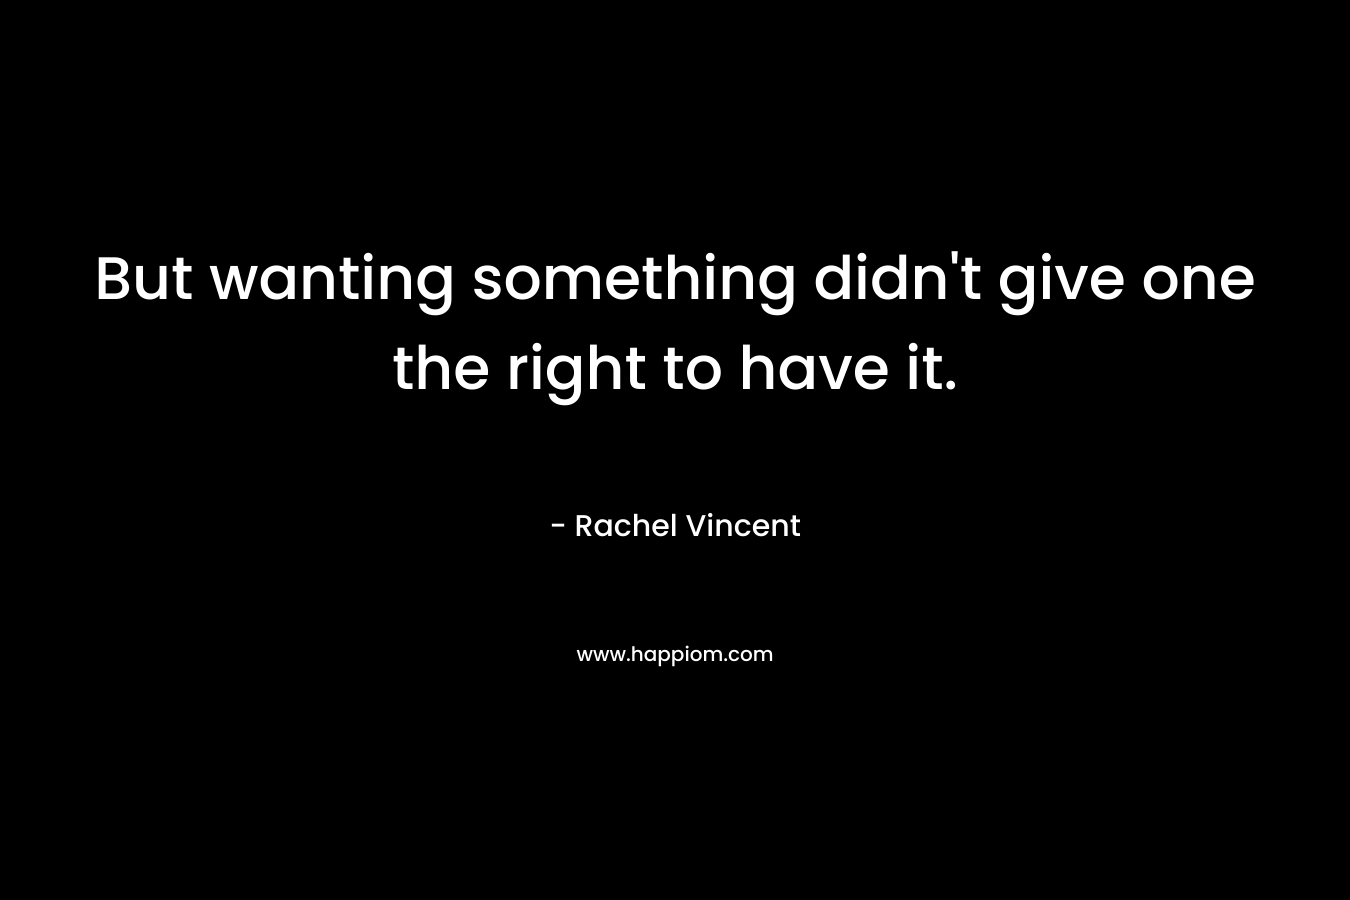 But wanting something didn't give one the right to have it.